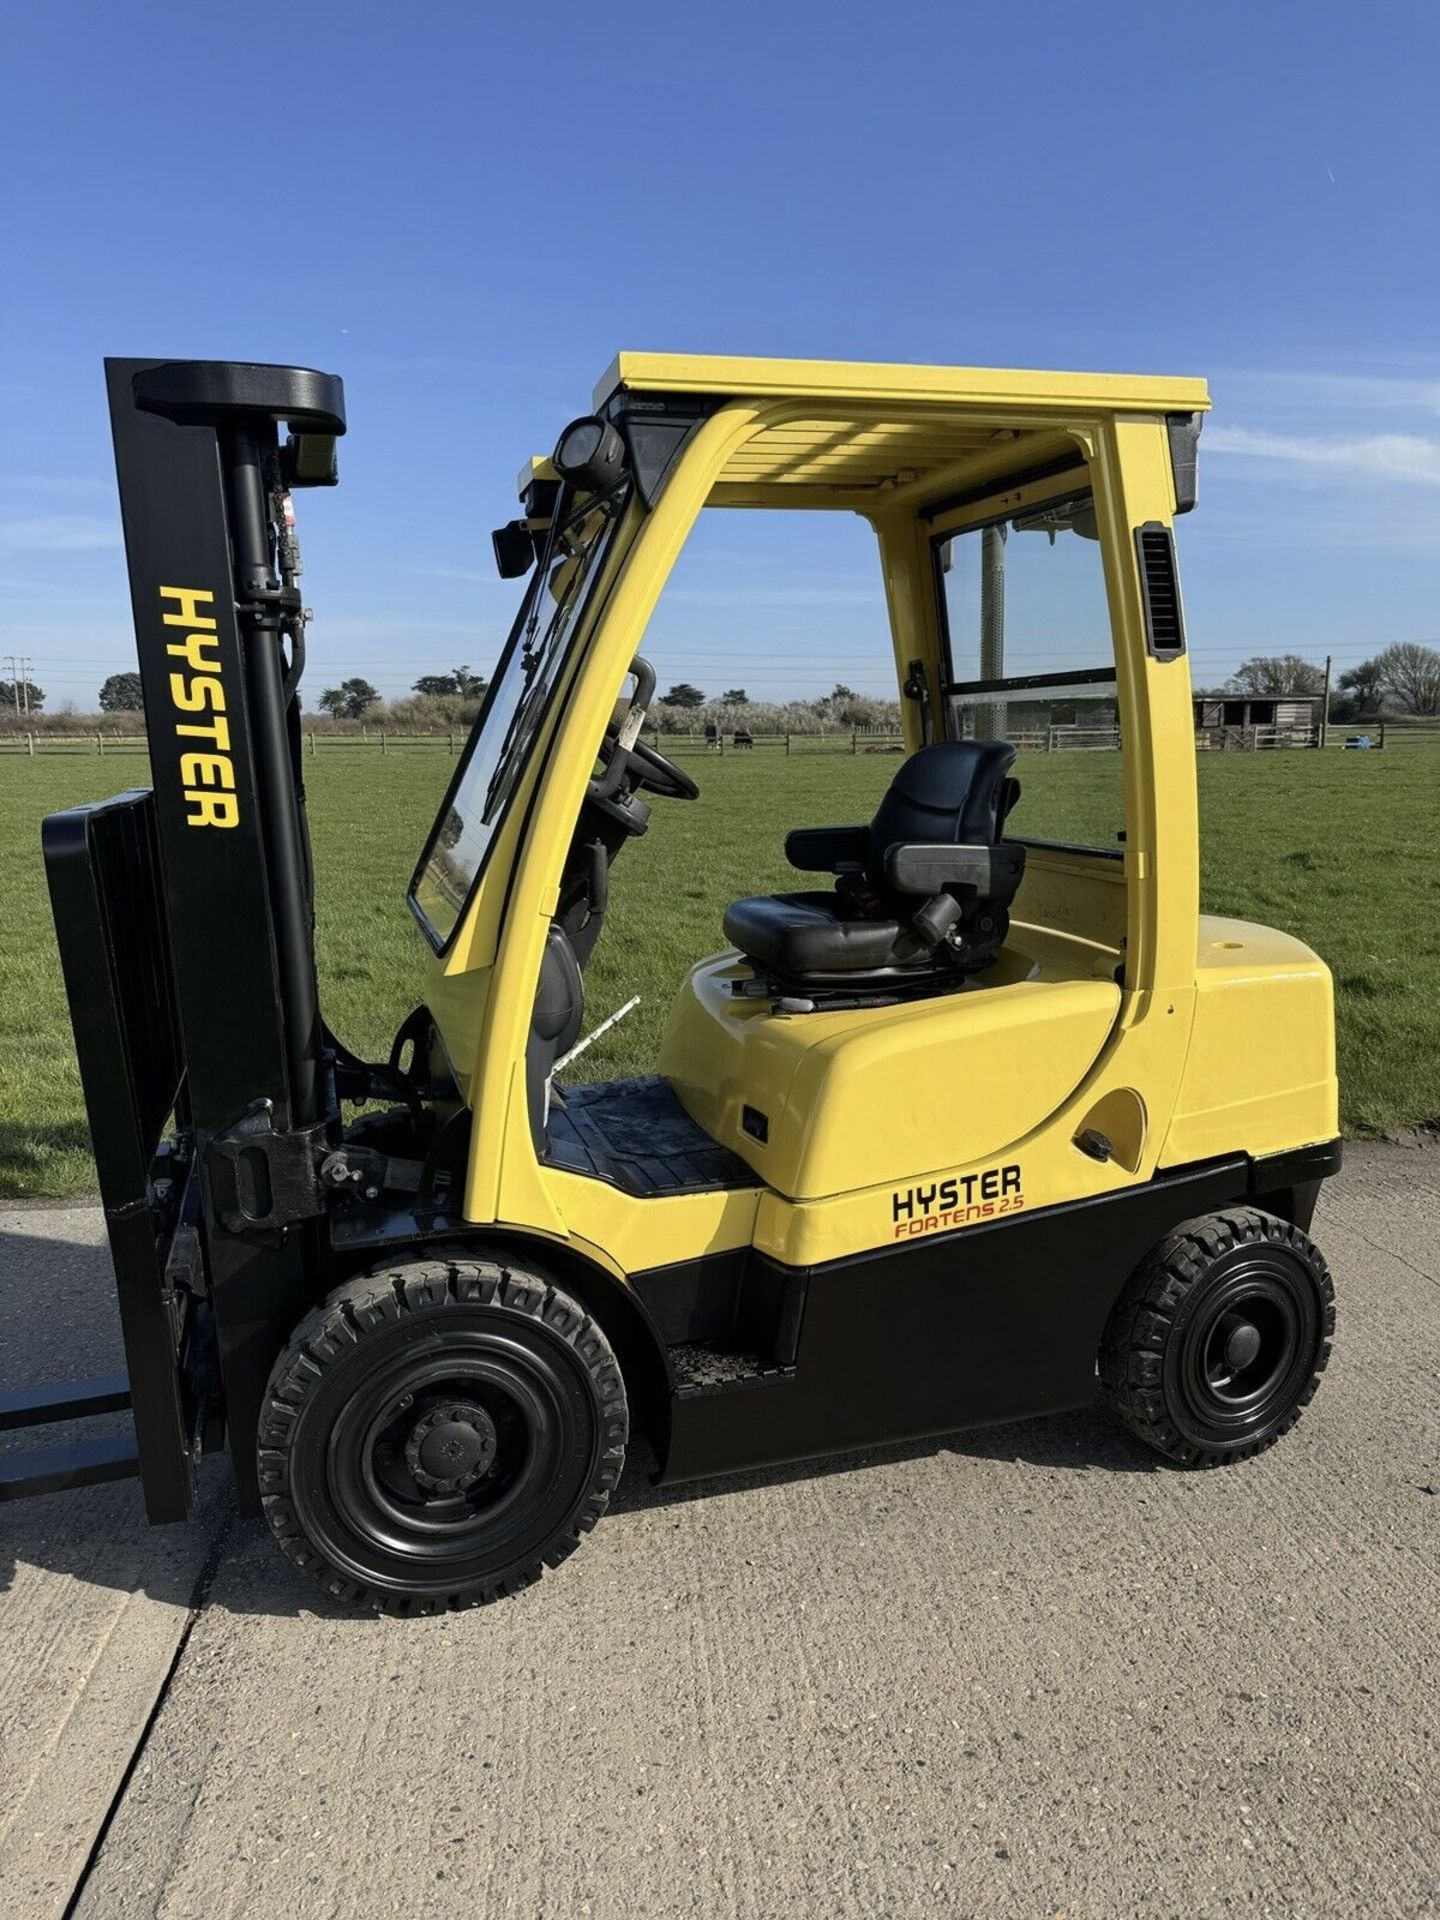 HYSTER, 2.5 Tonne Diesel Forklift (Container Spec) - Image 4 of 5